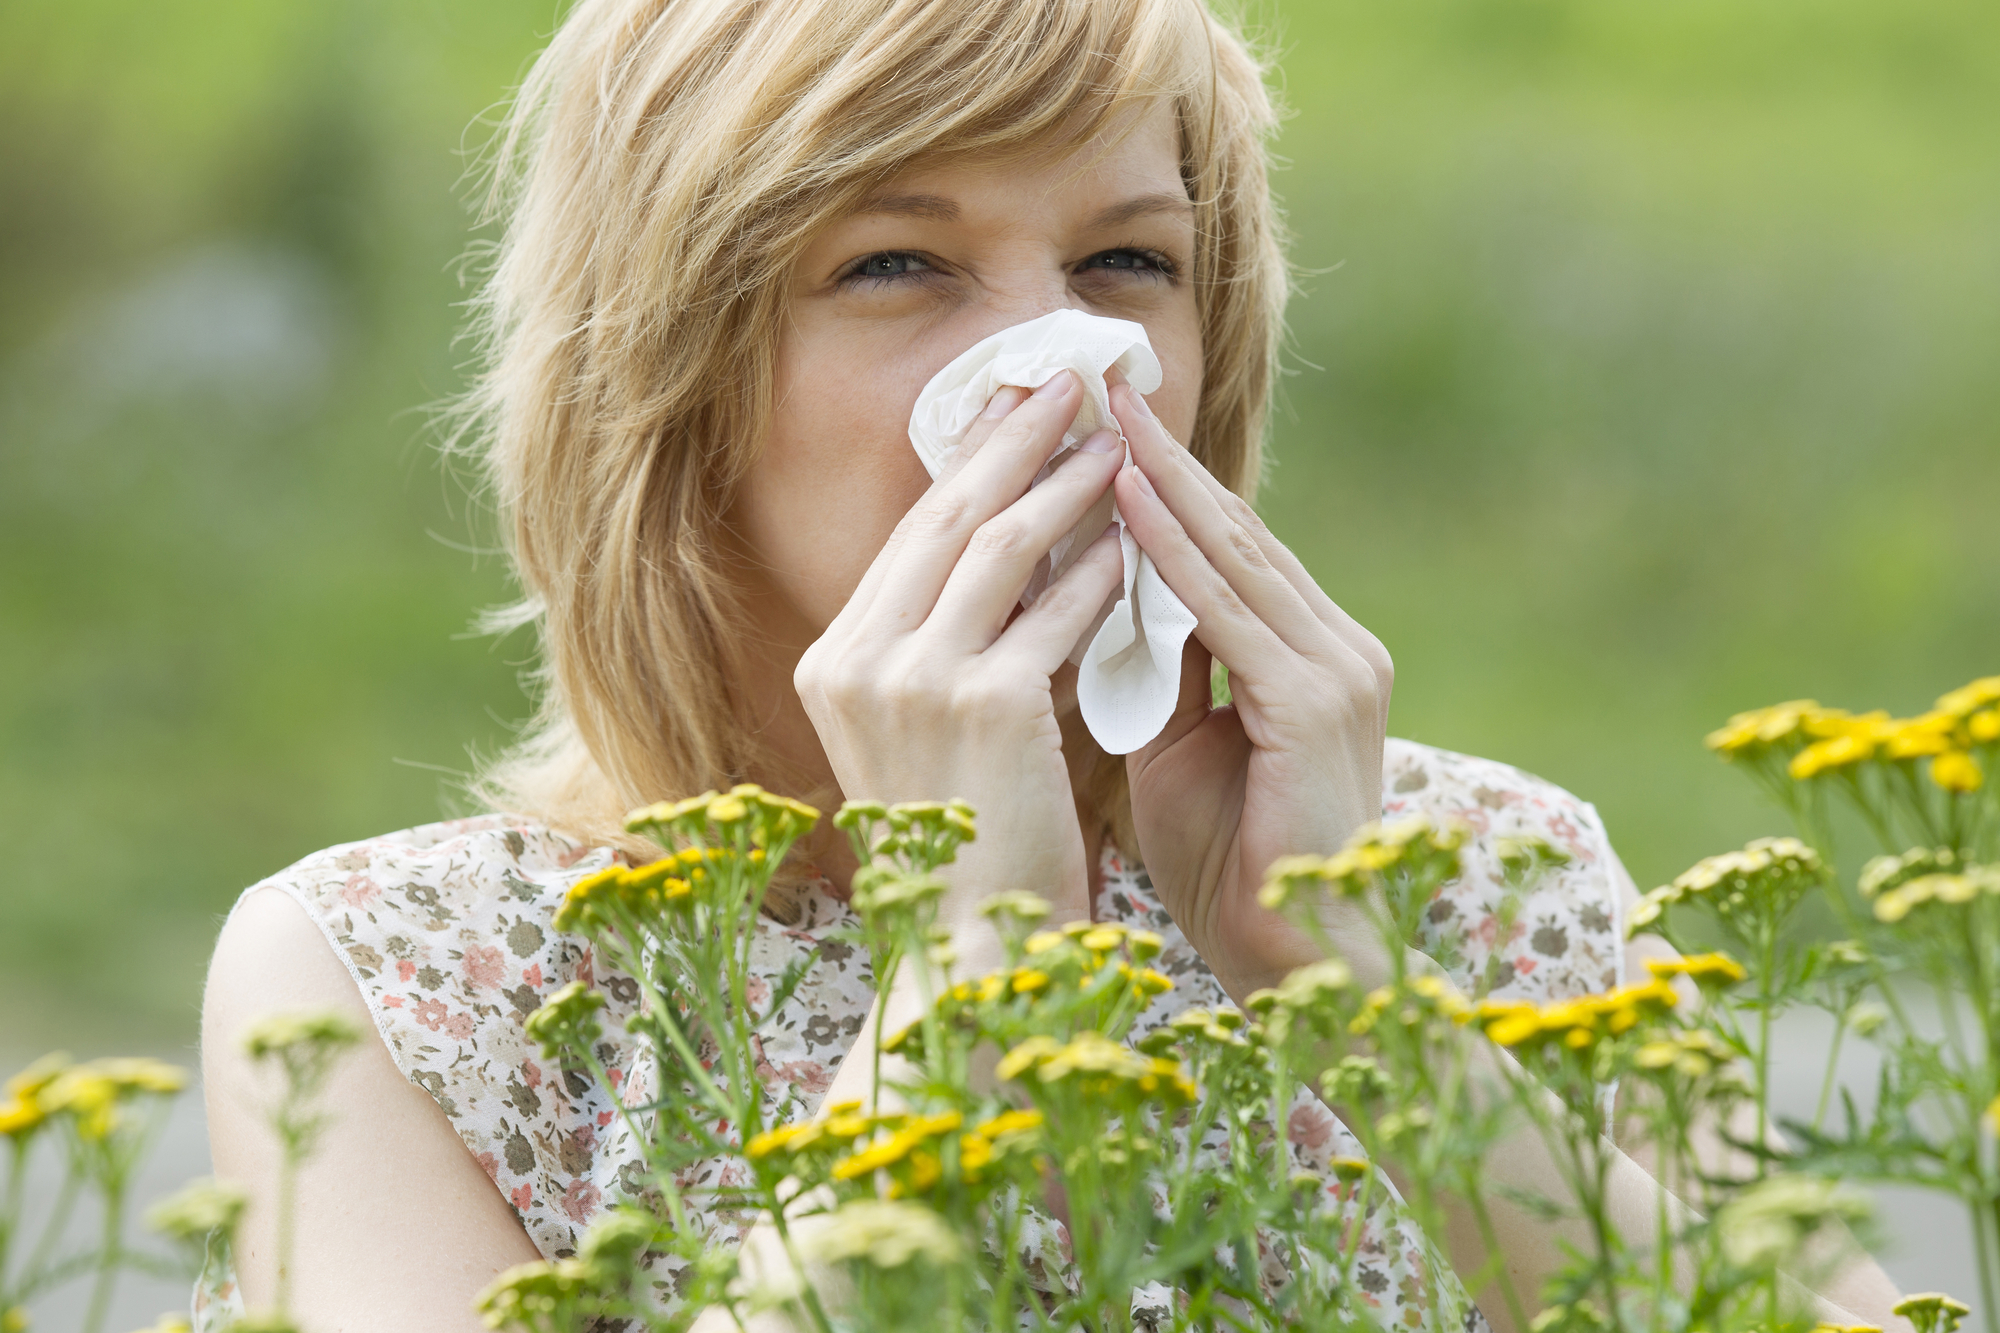 Young woman blowing nose into tissue in front of flowers